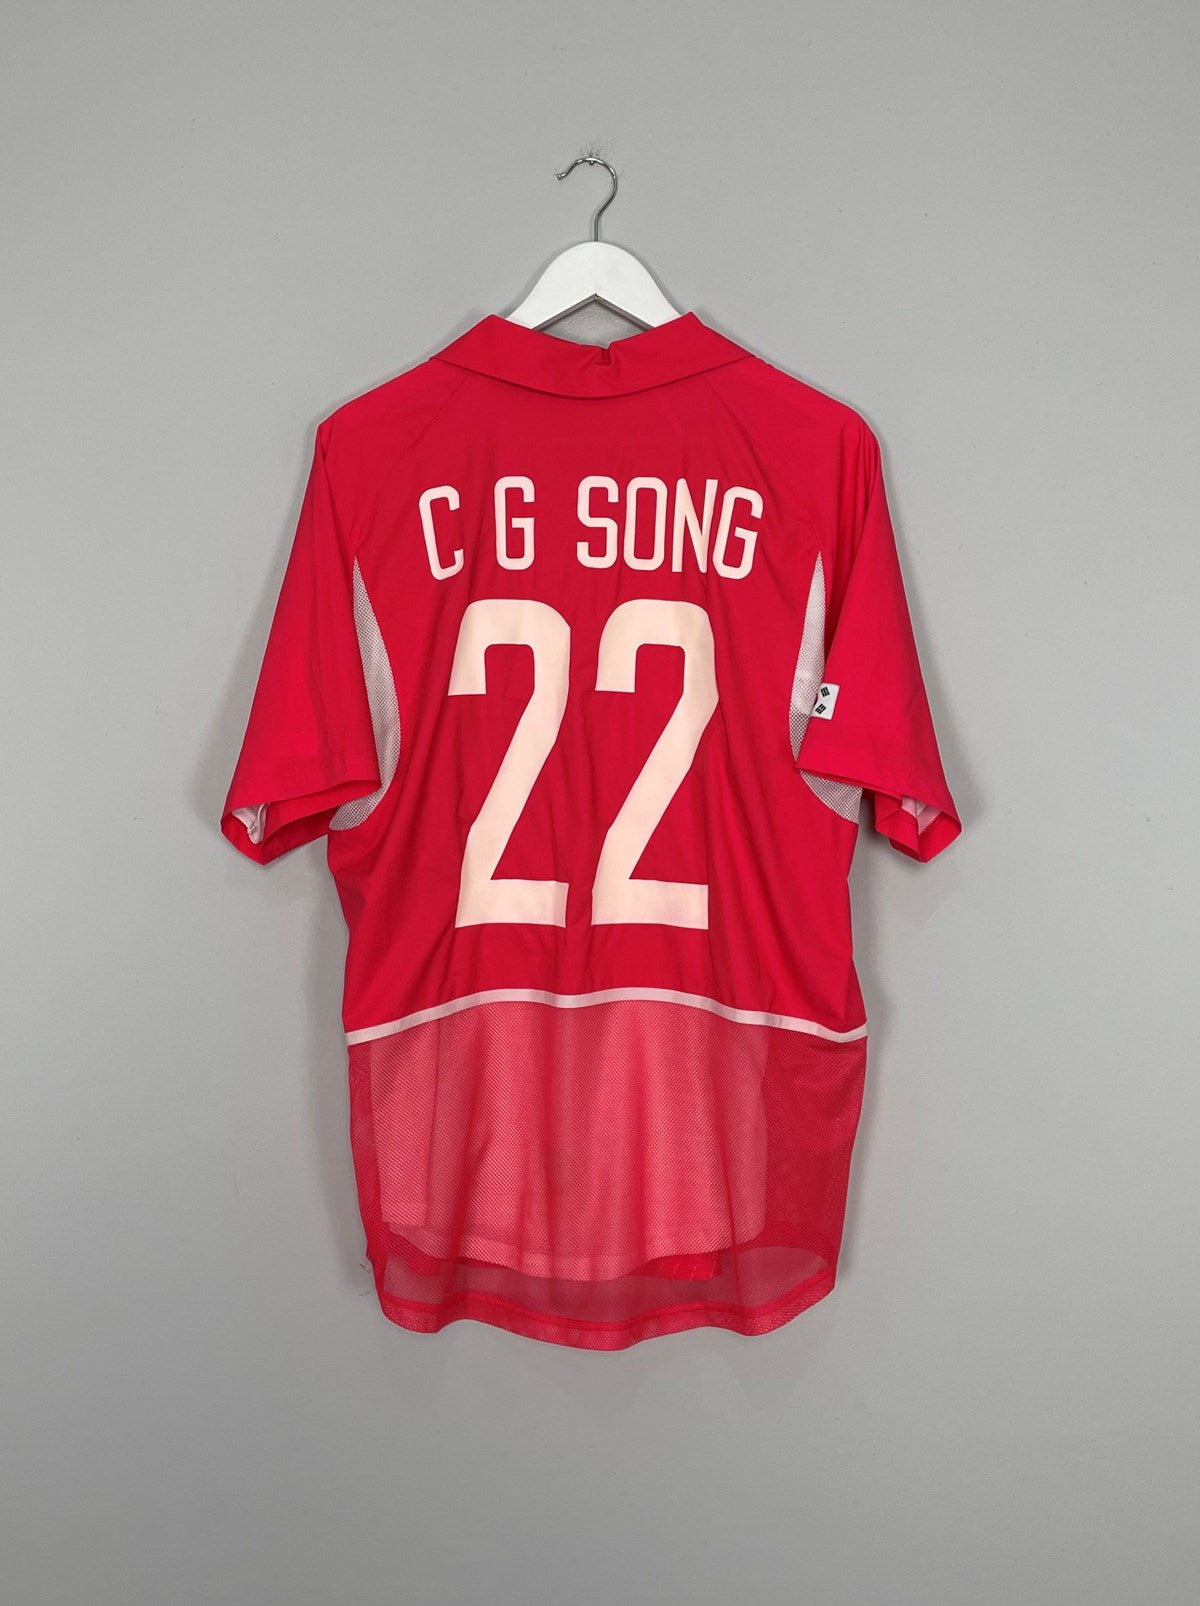 2002/04 SOUTH KOREA C G SONG #22 *PLAYER ISSUE* HOME SHIRT (L) NIKE